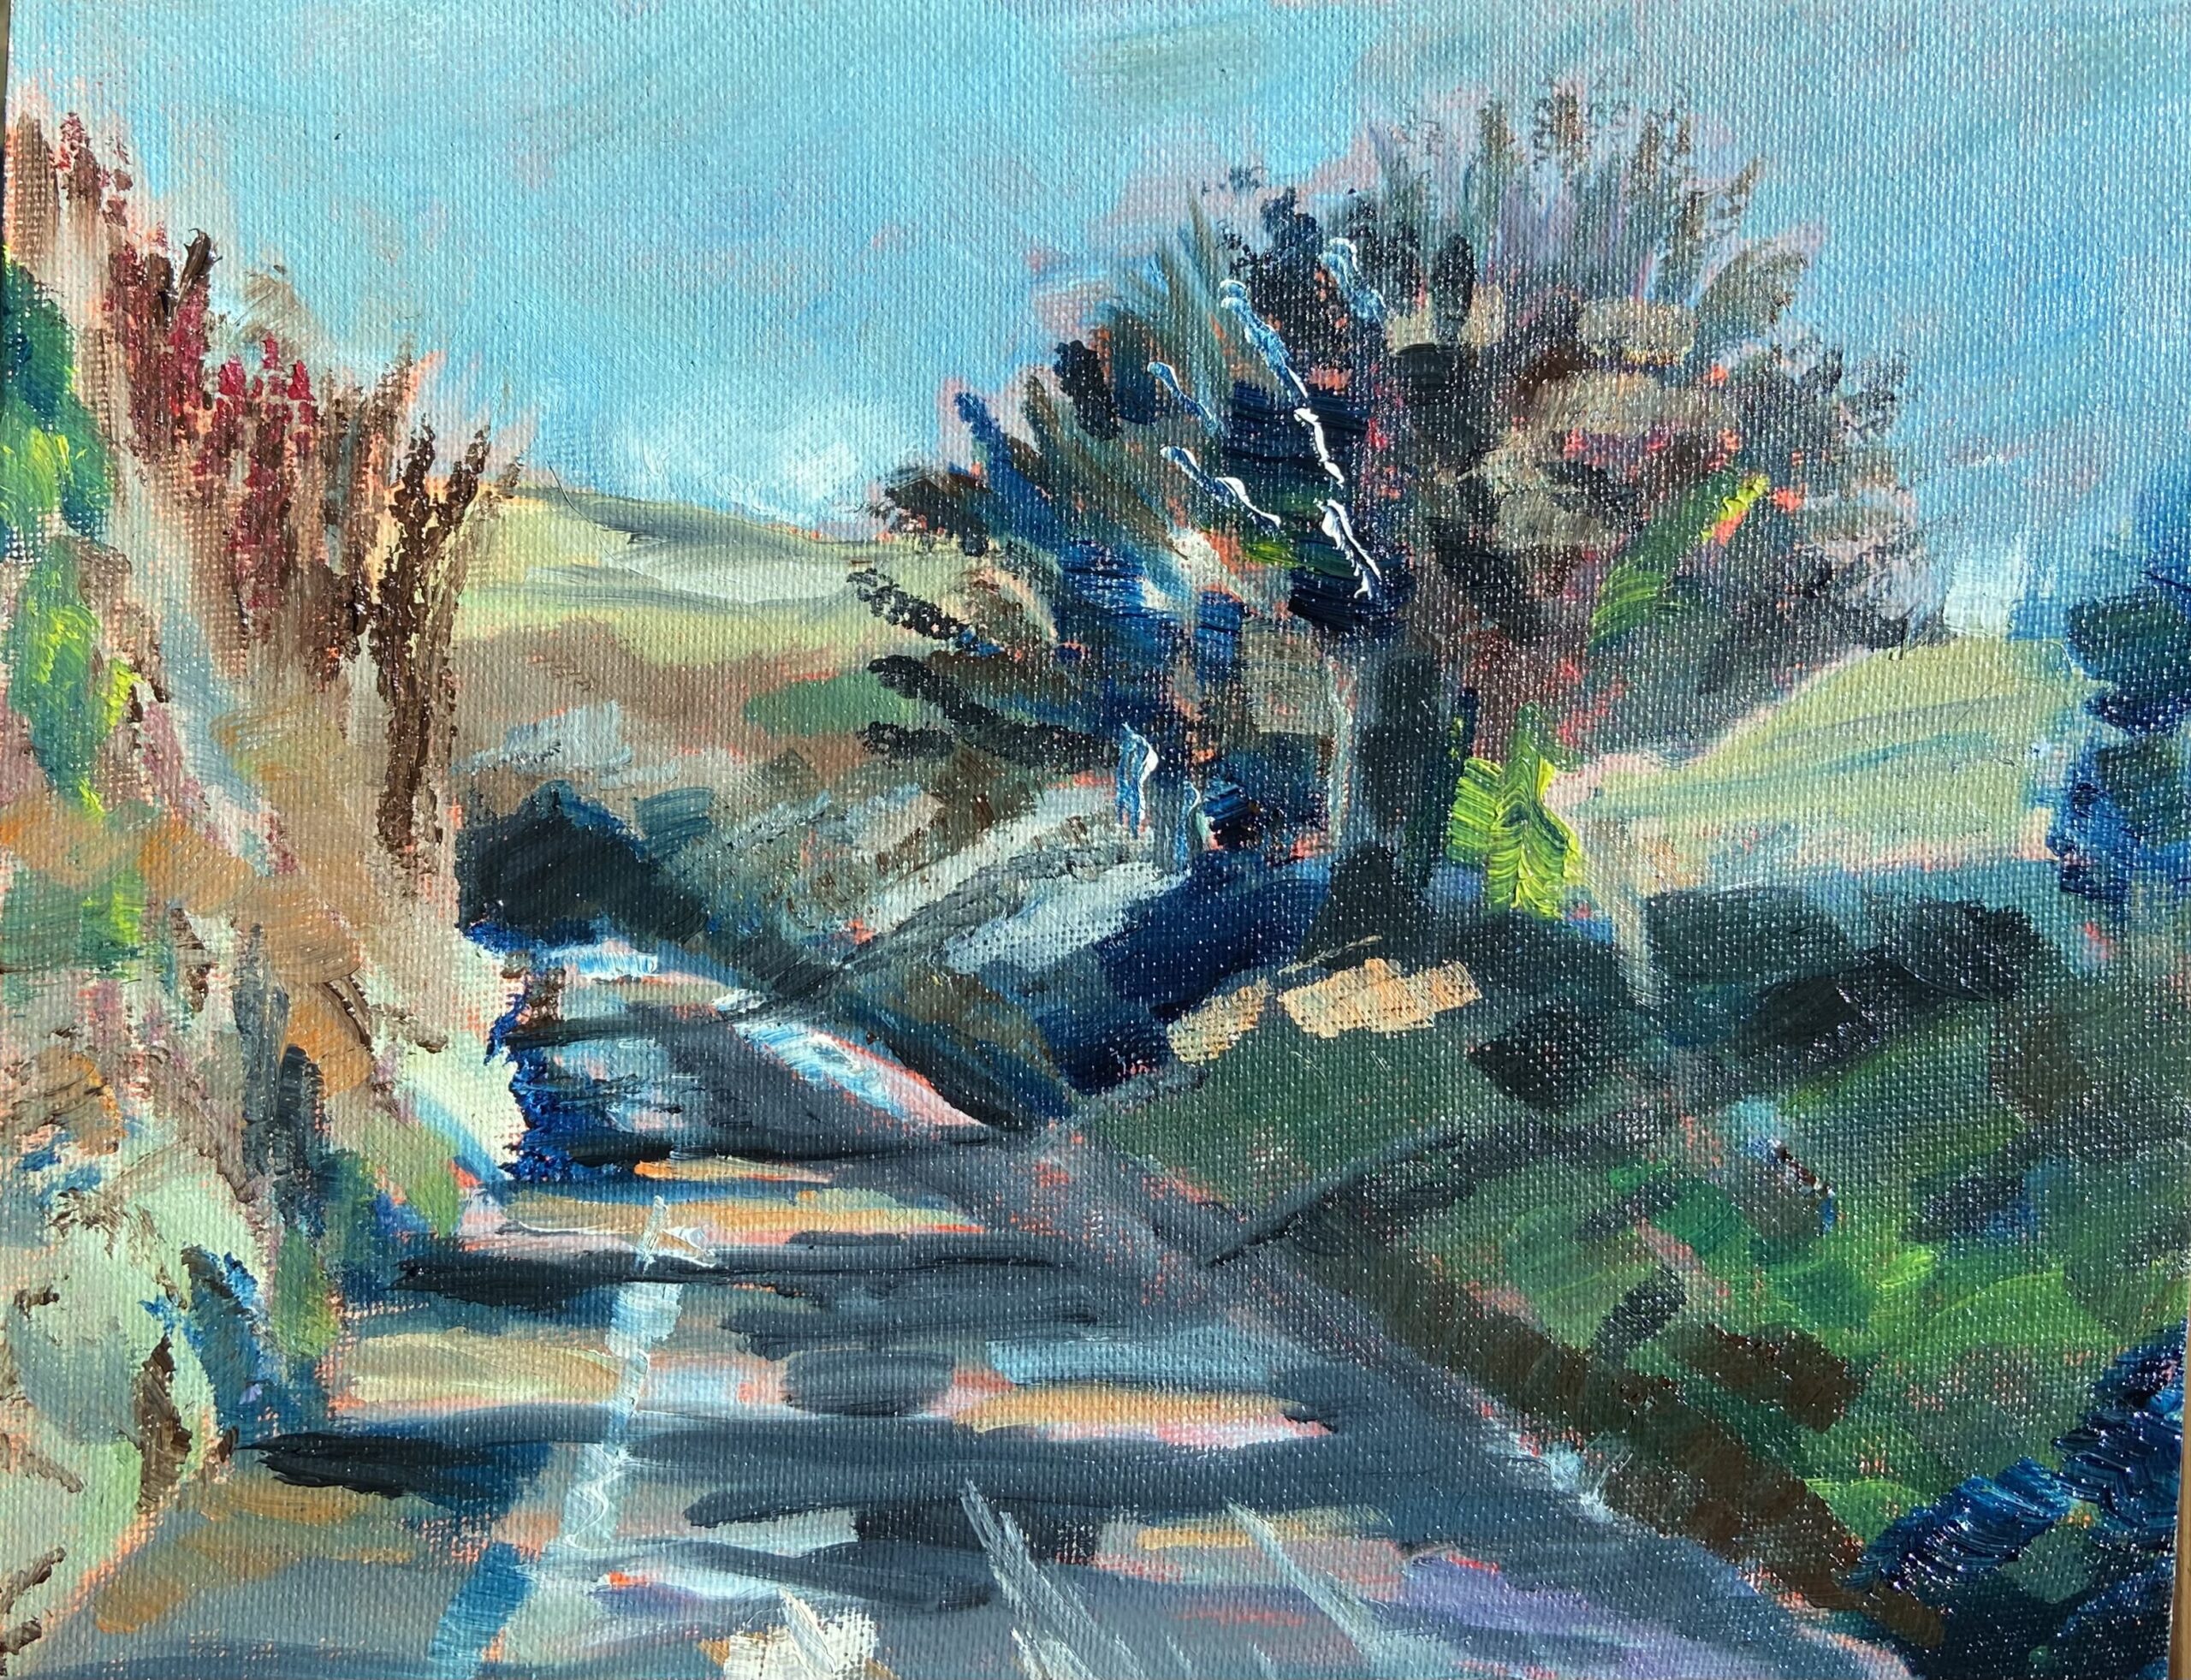 Lunchtime sun on the road by Polly Skye